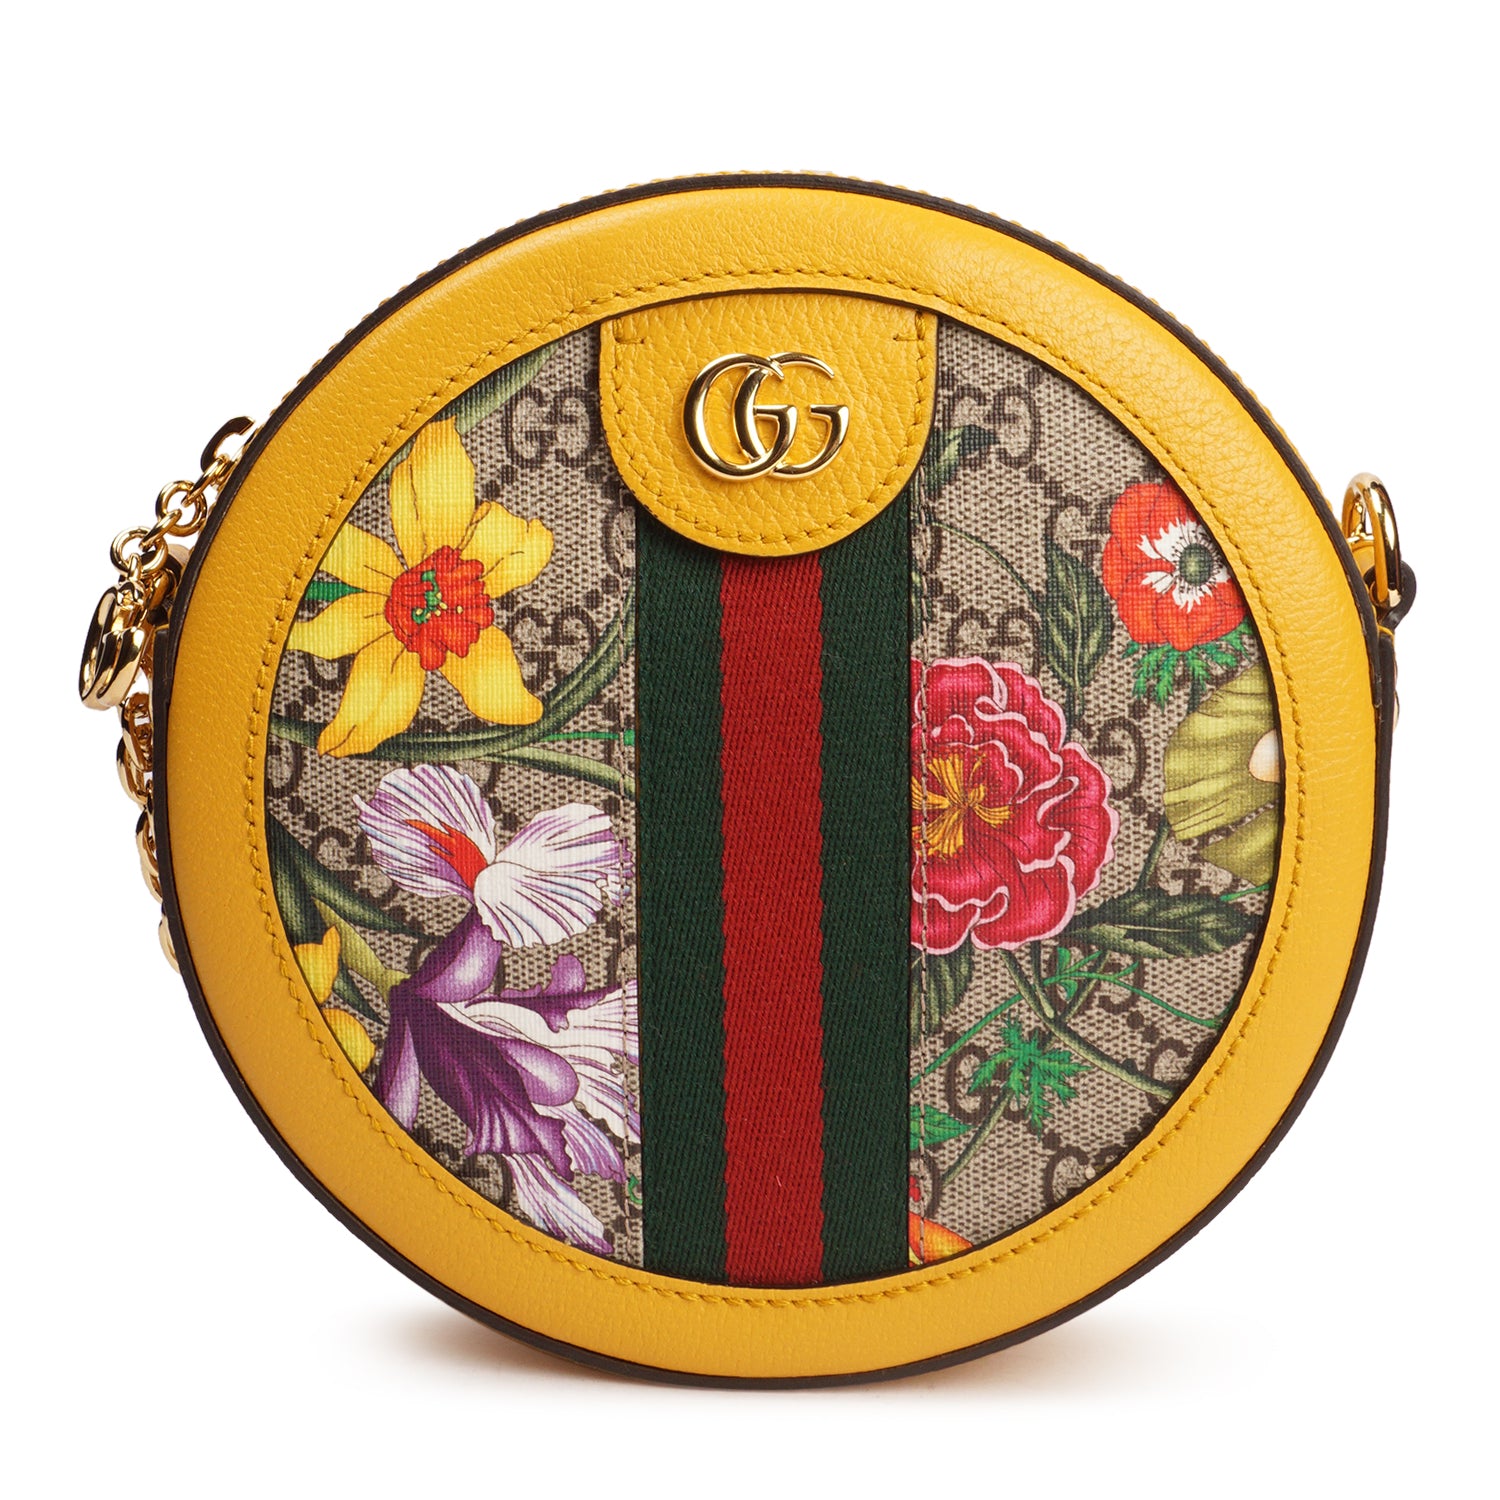 GUCCI MINI OPHIDIA FLORA PATTERN SHOULDER BAG IN YELLOW